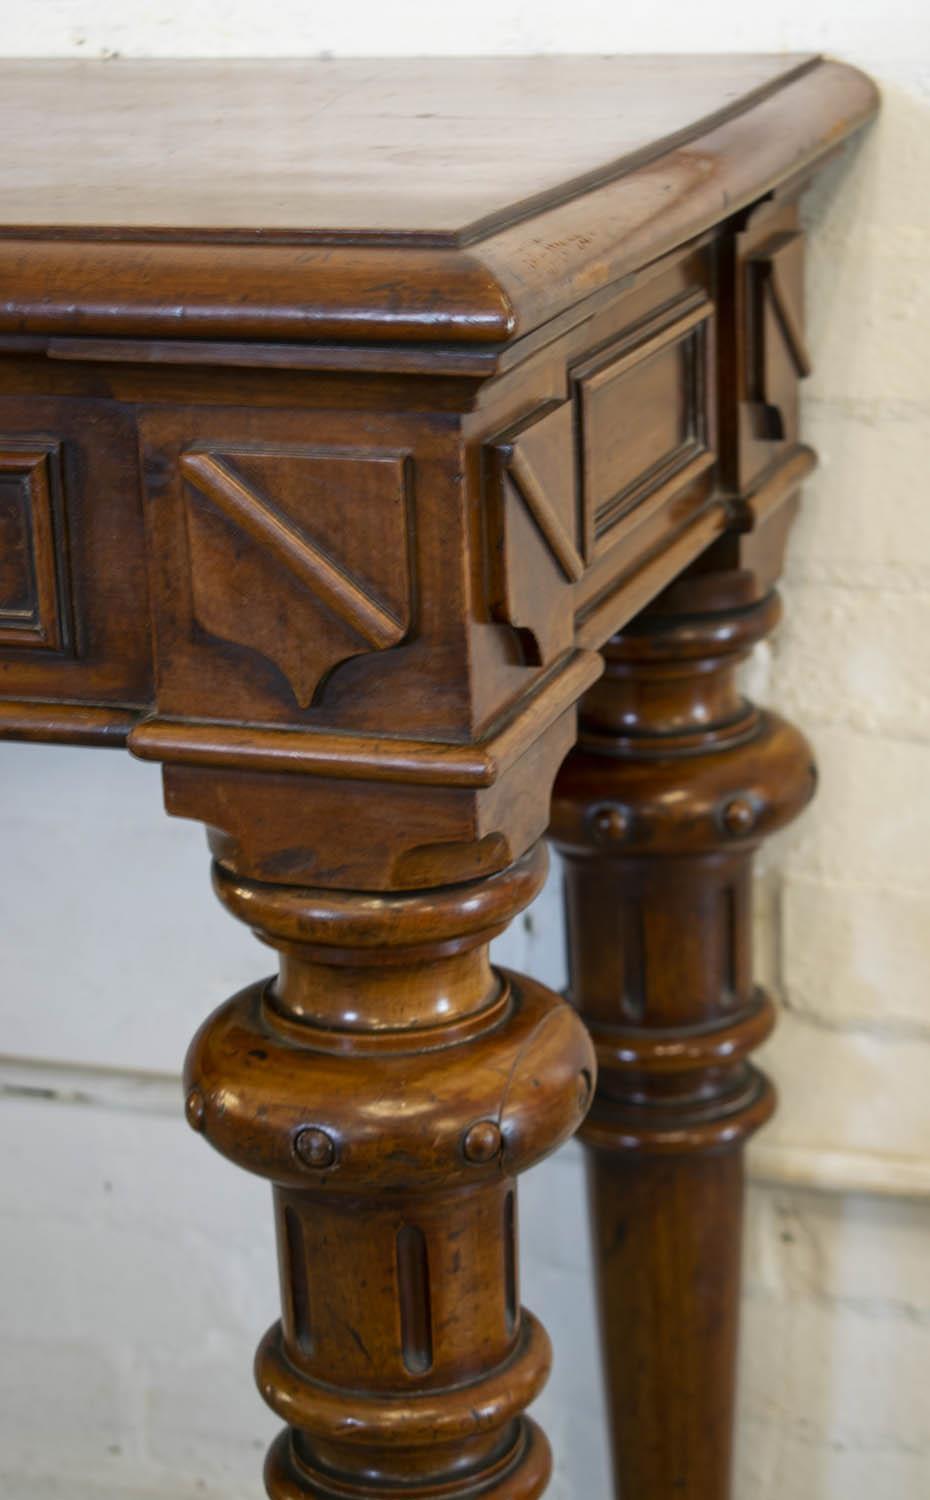 SIDE TABLE, Victorian mahogany, circa 1850 with shield moulded frieze on turned legs, adapted drawer - Image 2 of 4